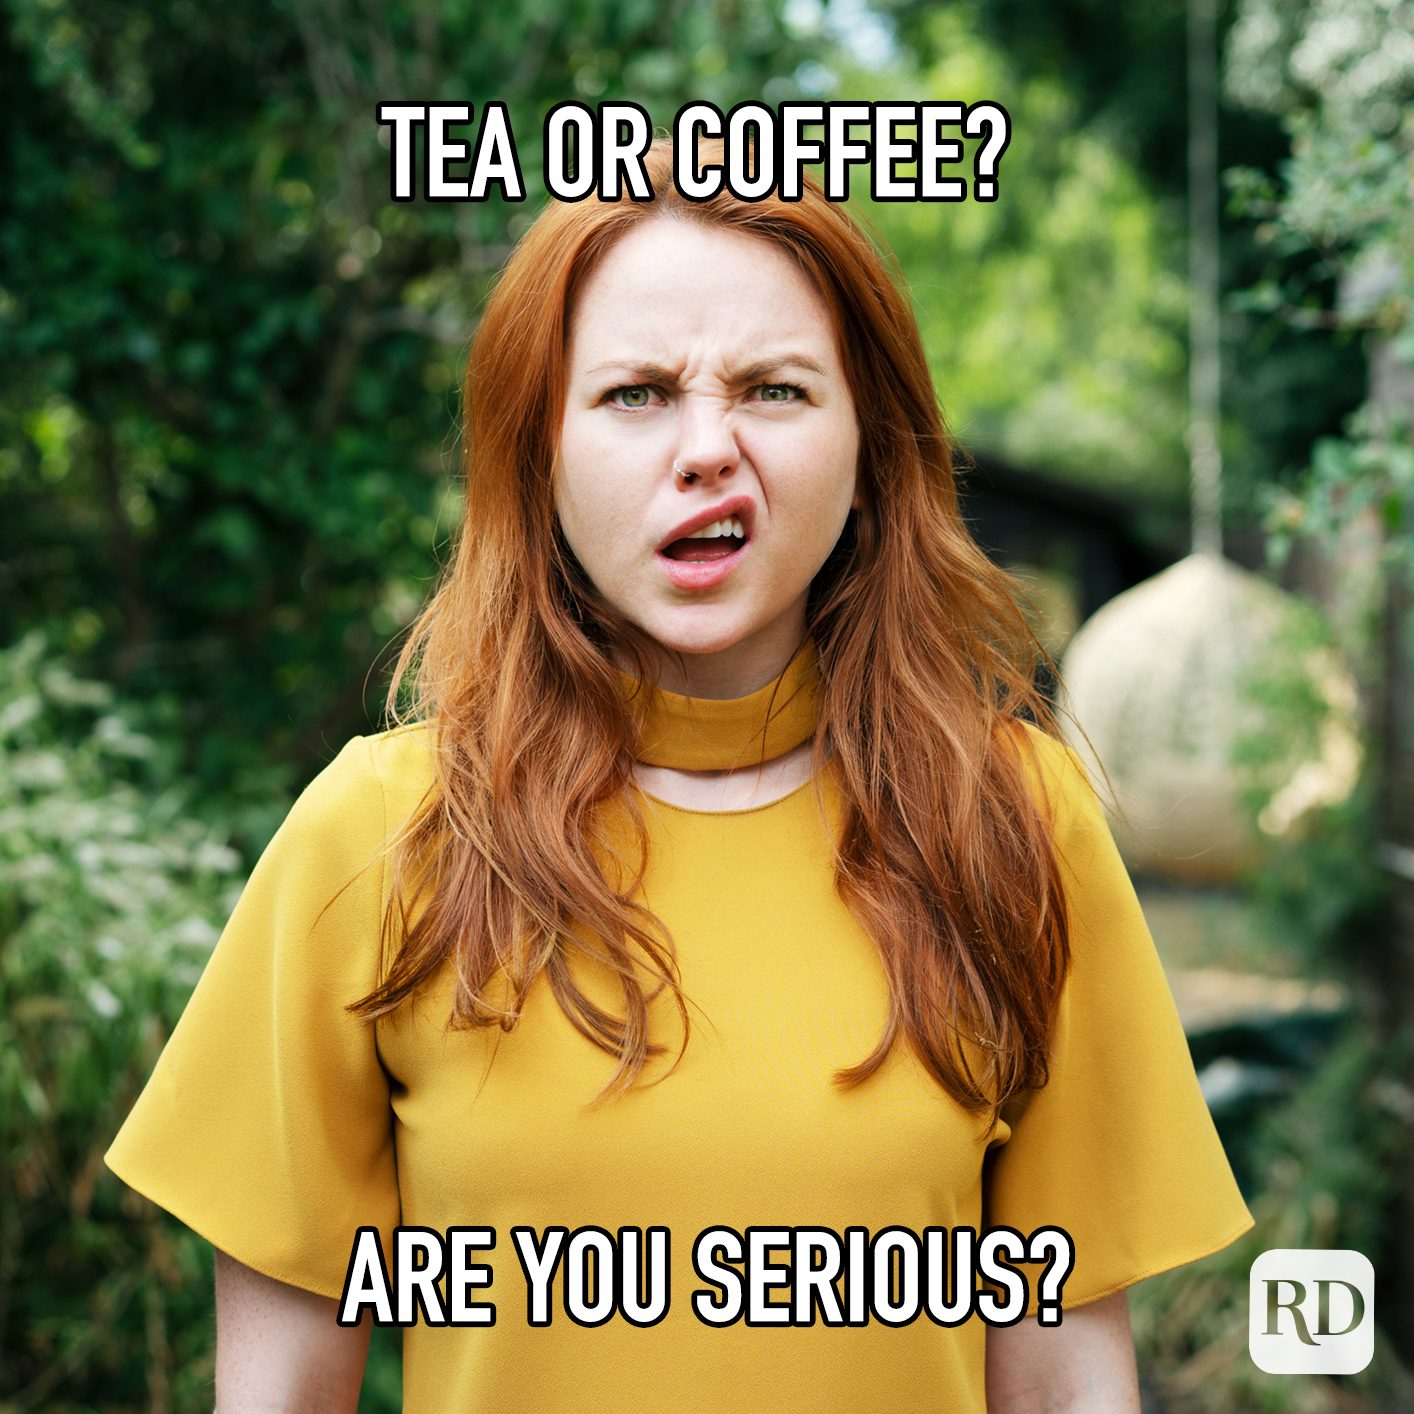 Tea Or Coffee? Are You Serious? meme text over image of woman looking confused